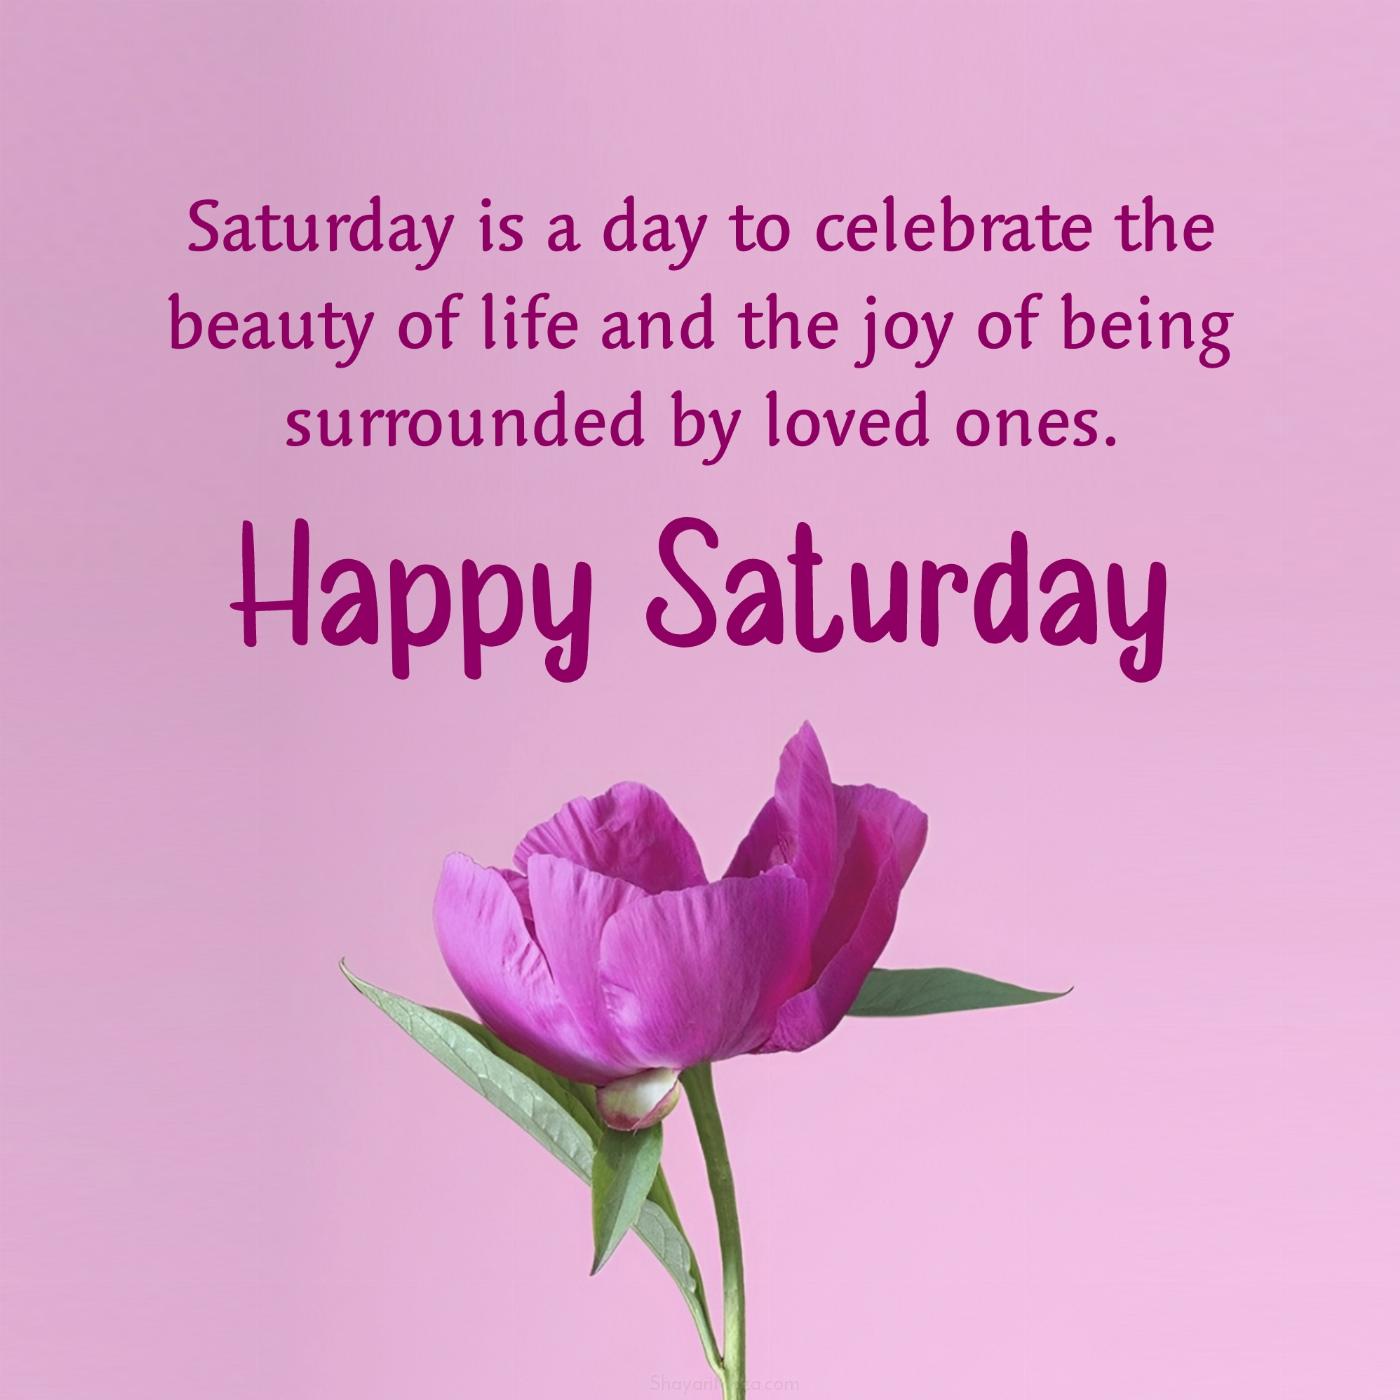 Saturday is a day to celebrate the beauty of life